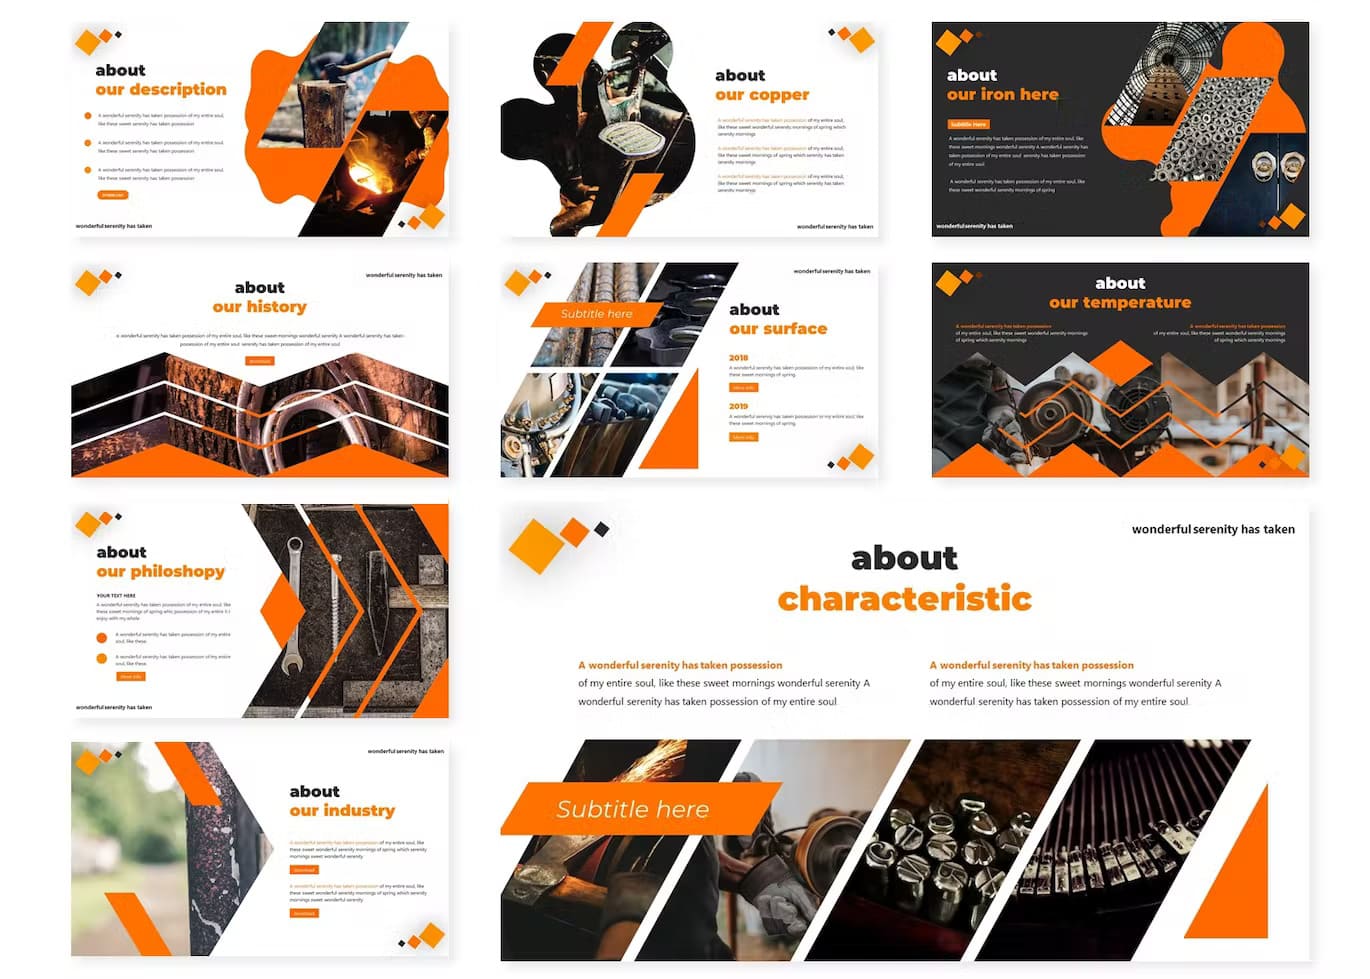 9 Slides Irona: About our description, about our copper, about our iron here.